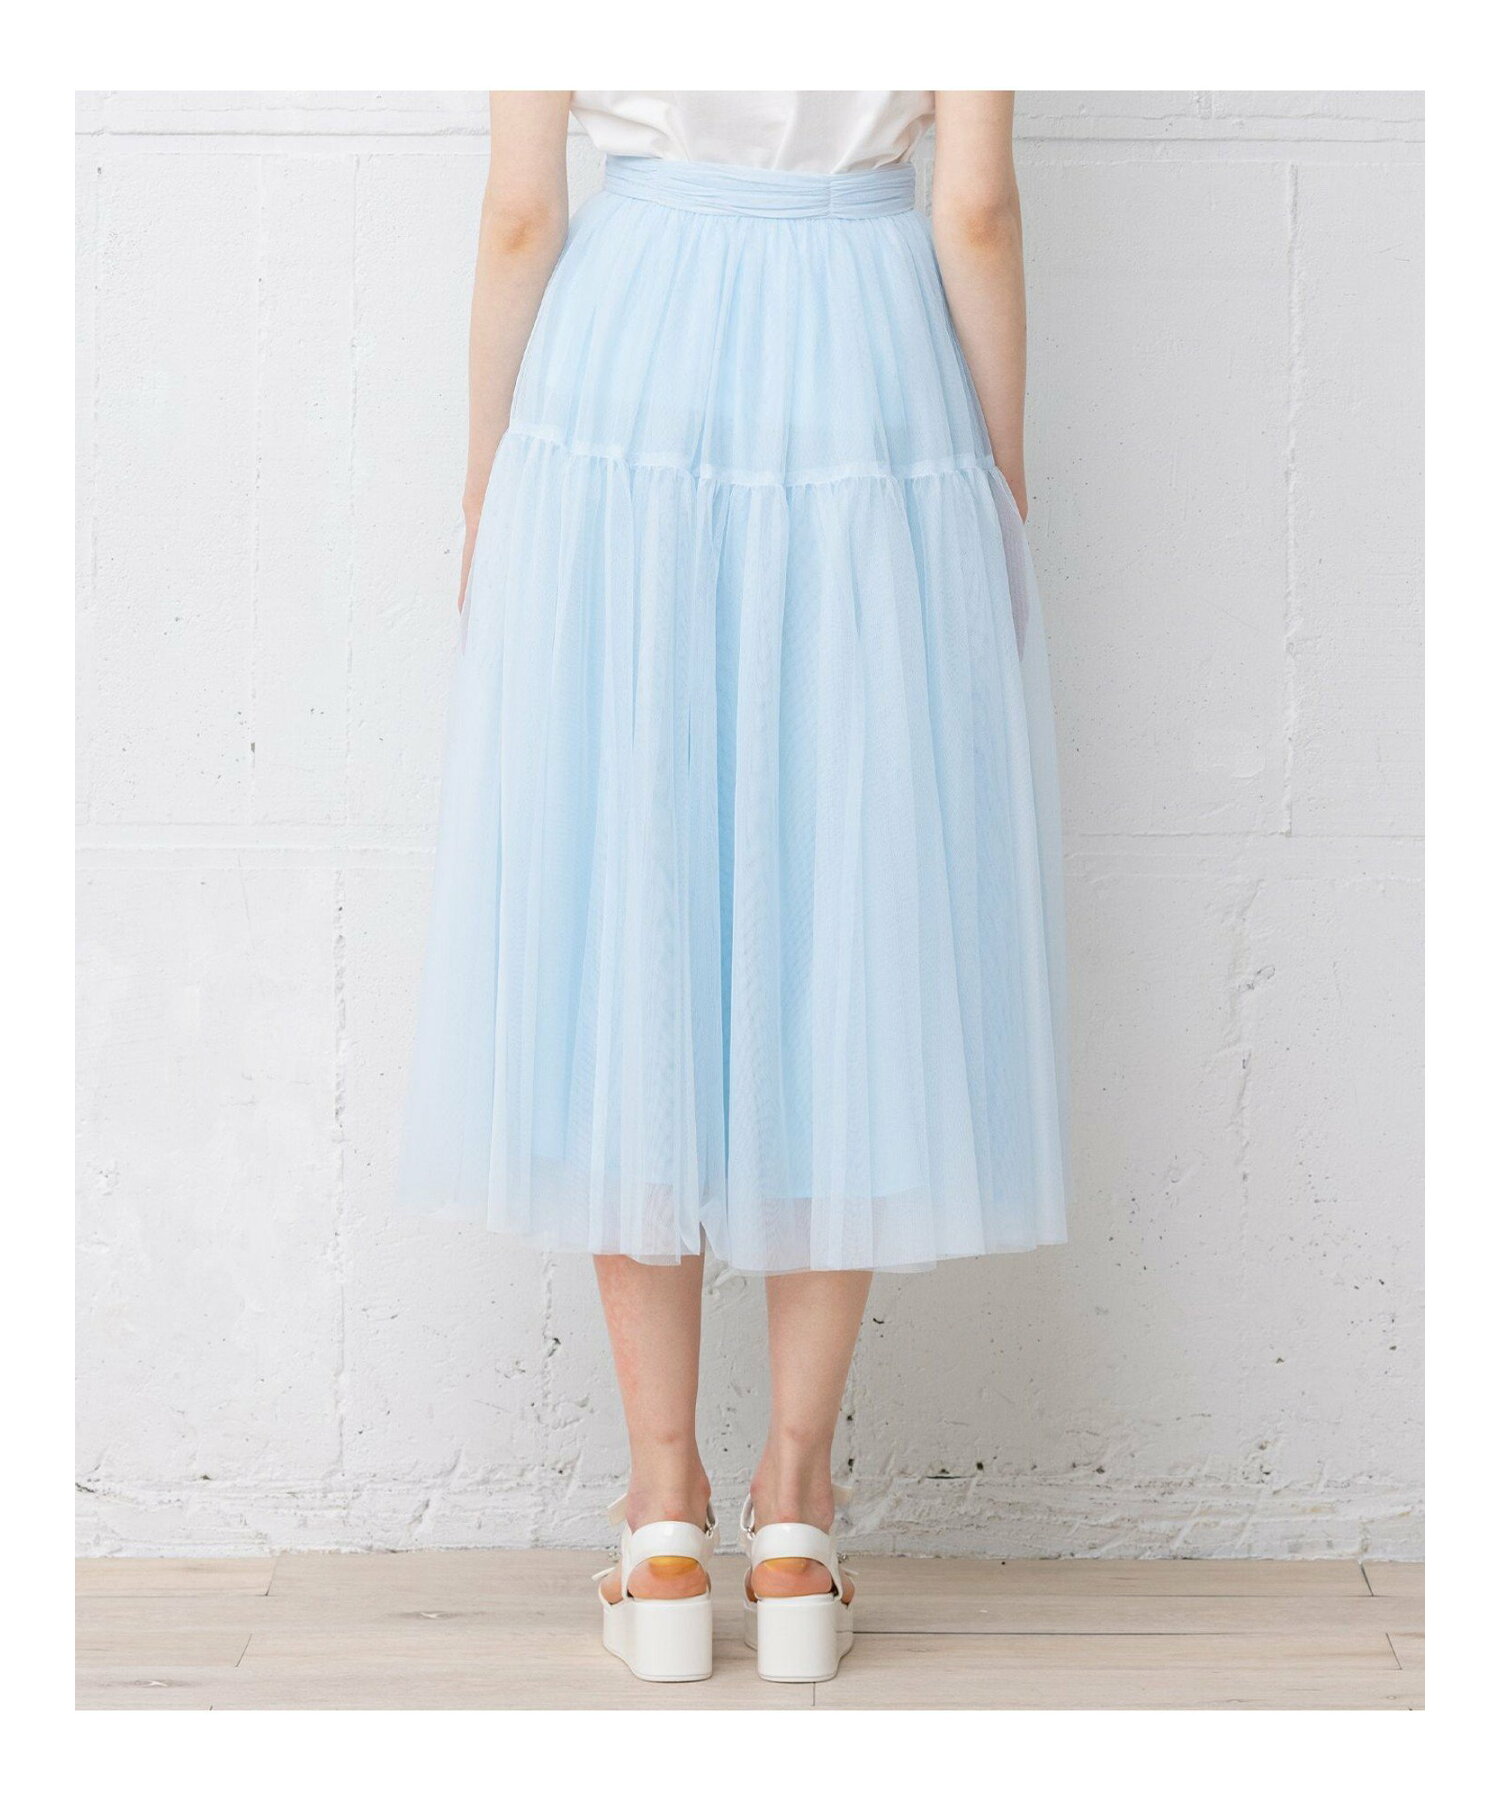 【WEB限定】【TOCCA lAVENDER】Fruit Color Tulle Skirt スカート